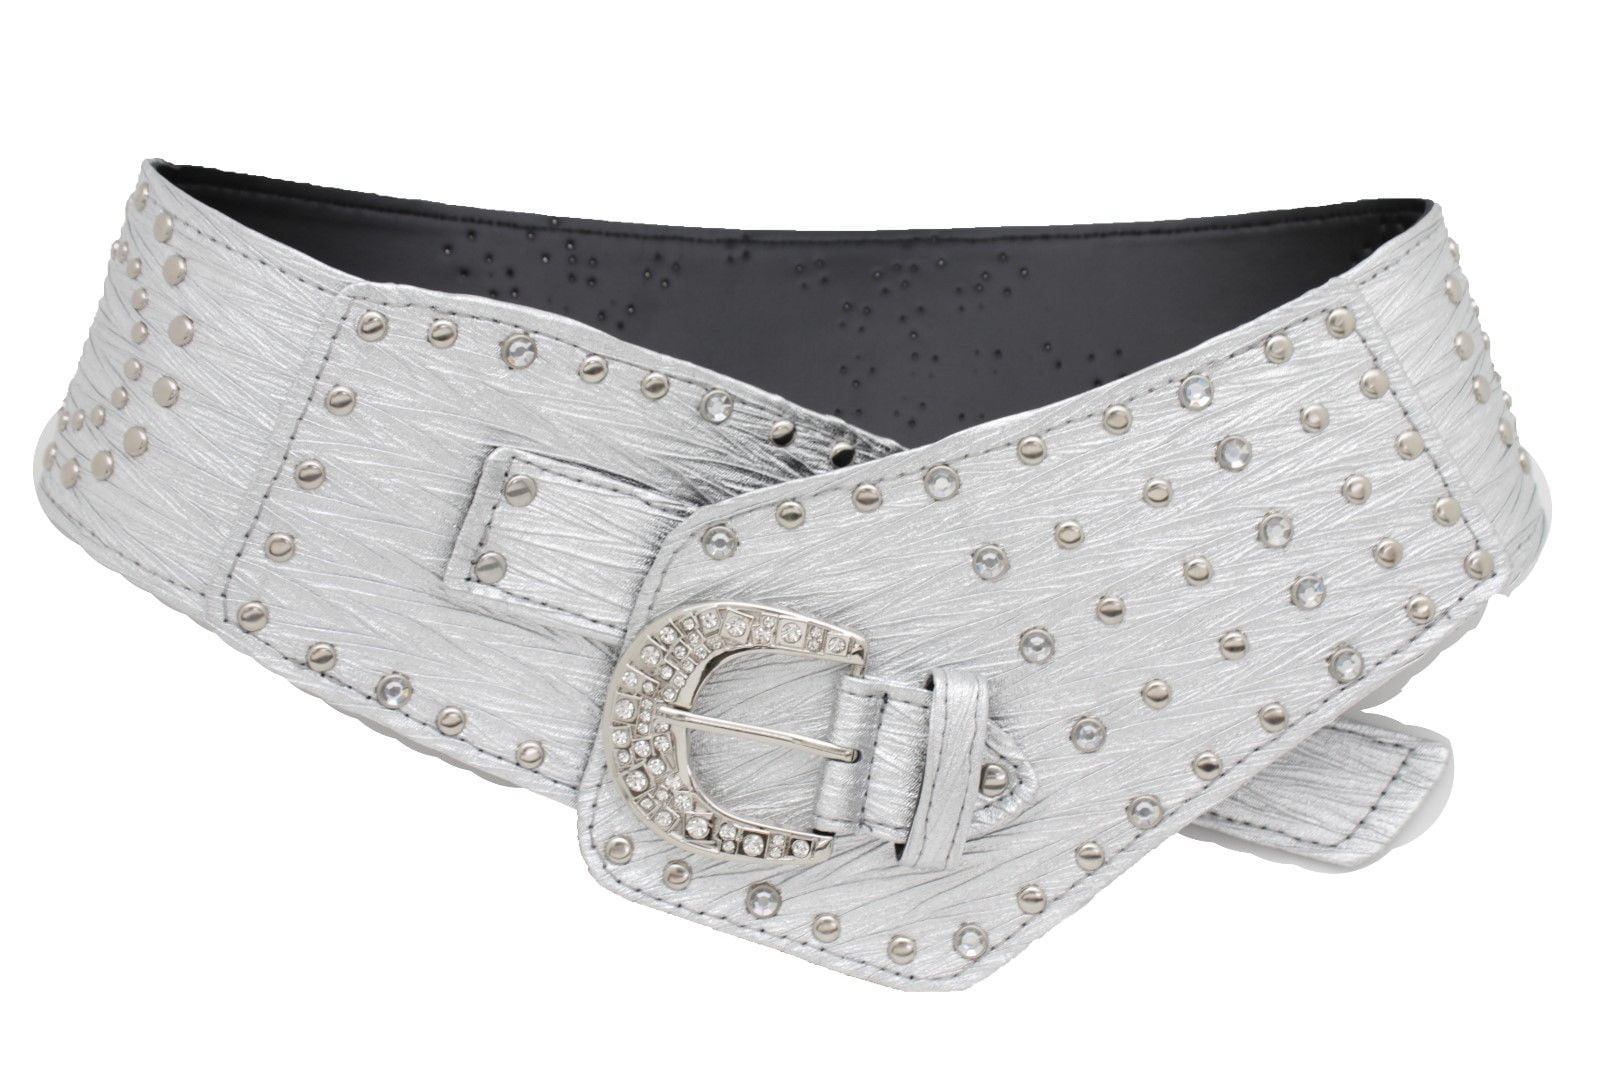 HIGH SWAROVSKY BELT AND STUDS WITH BIG BUCKLE Woman Black Silver  2014526854168